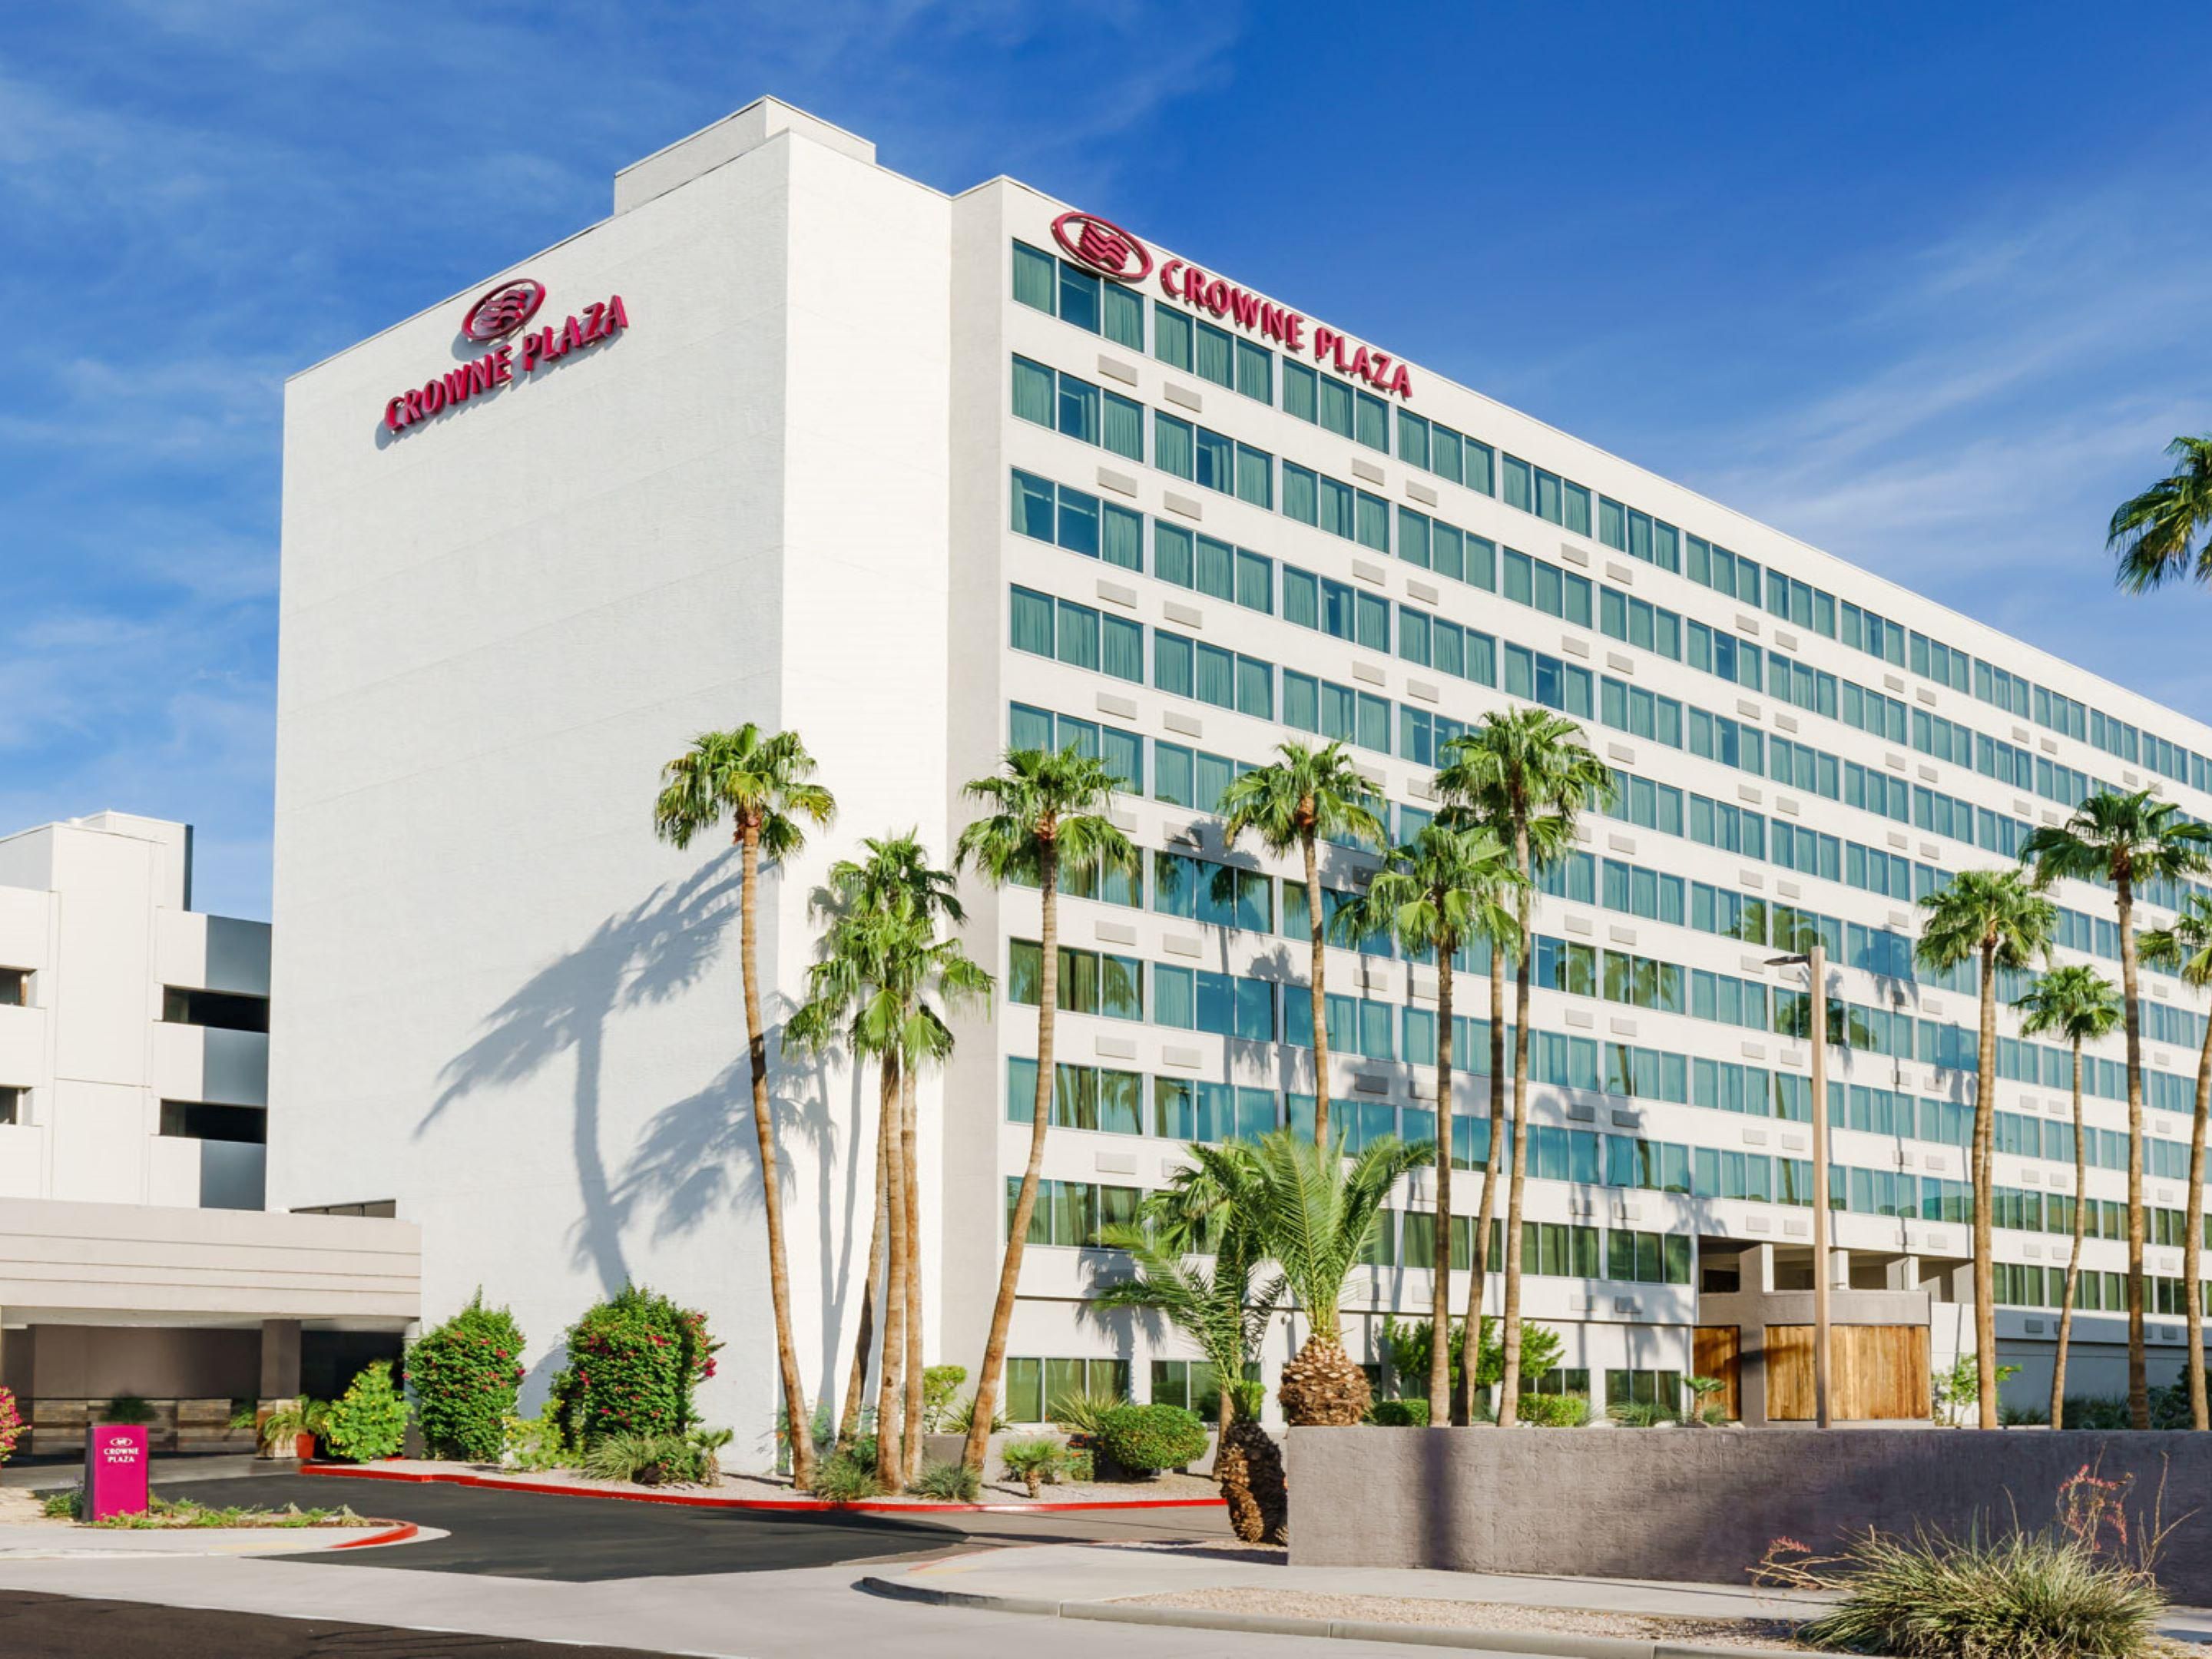 As the closest full-service hotel to the airport, you can leave the car rentals behind. Enjoy our free 24-hour airport shuttle and easy access to the nearby light rail. Explore downtown attractions like the Footprint Center, Chase Field, Arizona State University, or take a short walk to the new Phoenix Rising Stadium – all just minutes away.